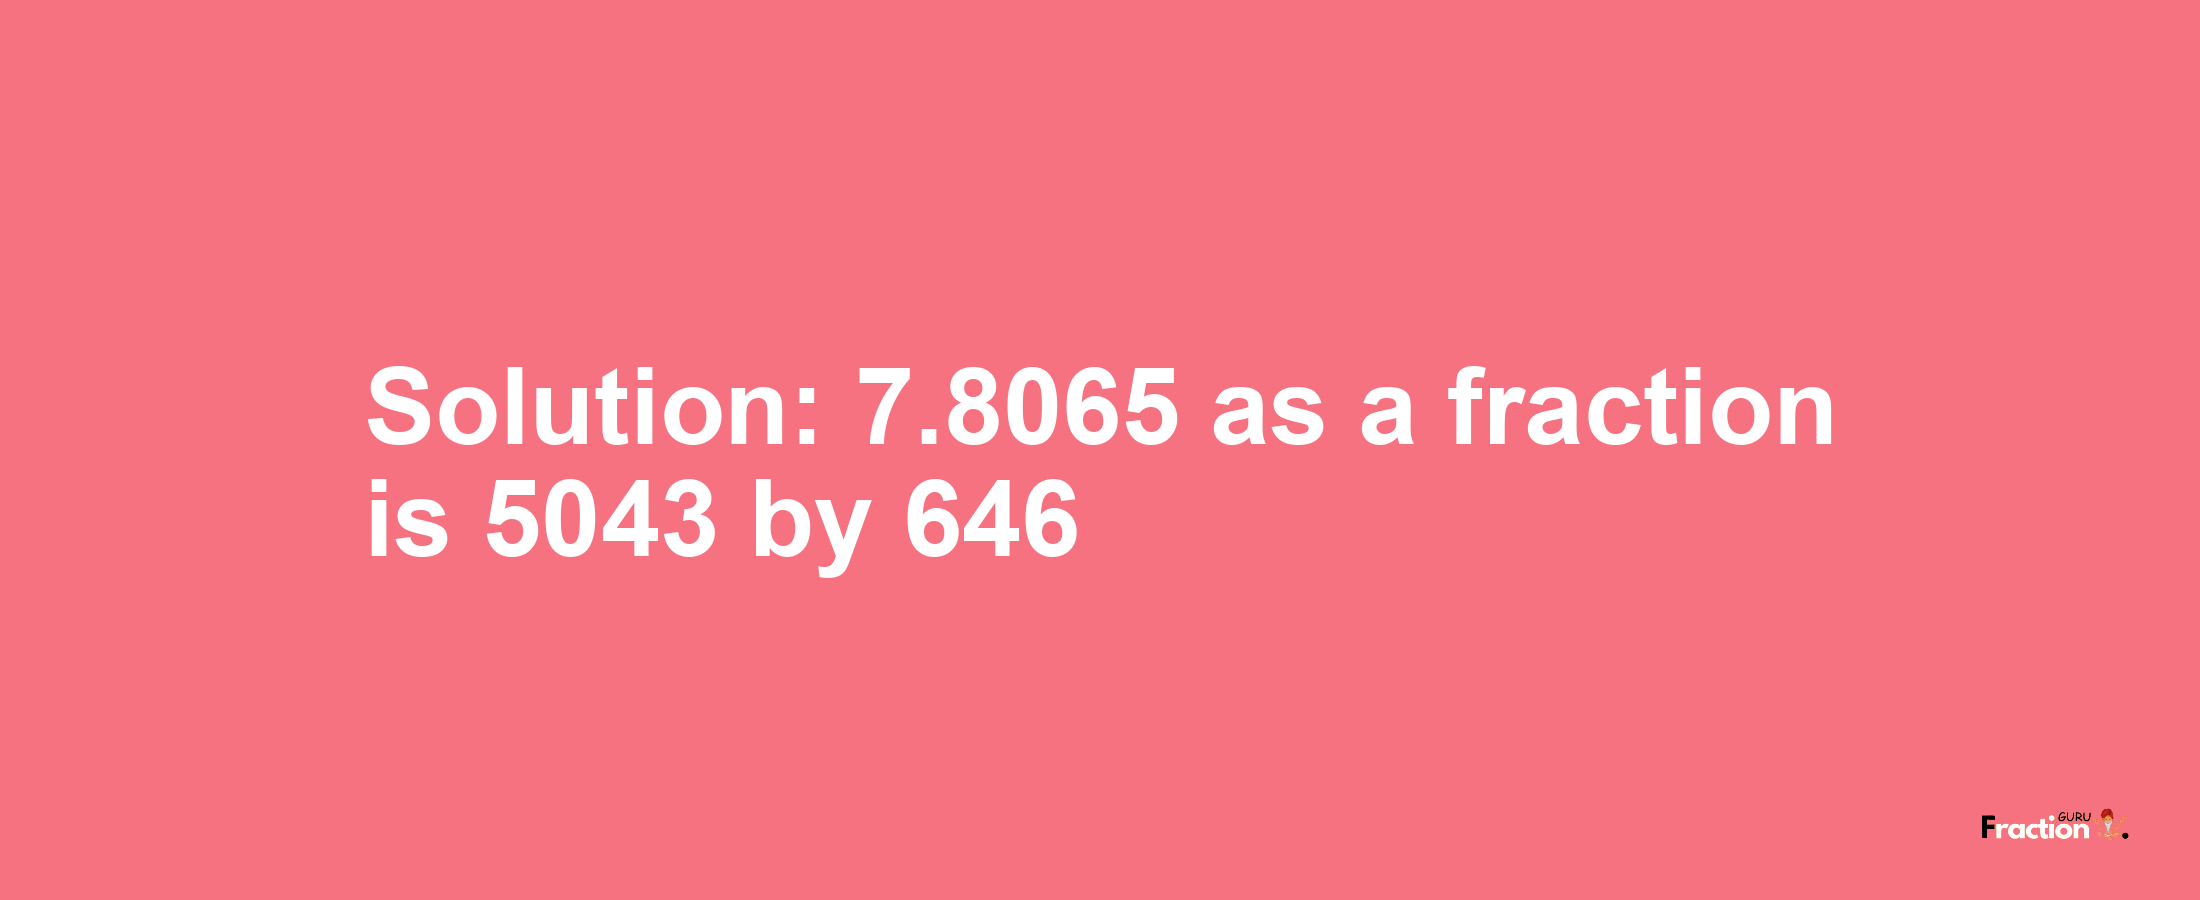 Solution:7.8065 as a fraction is 5043/646